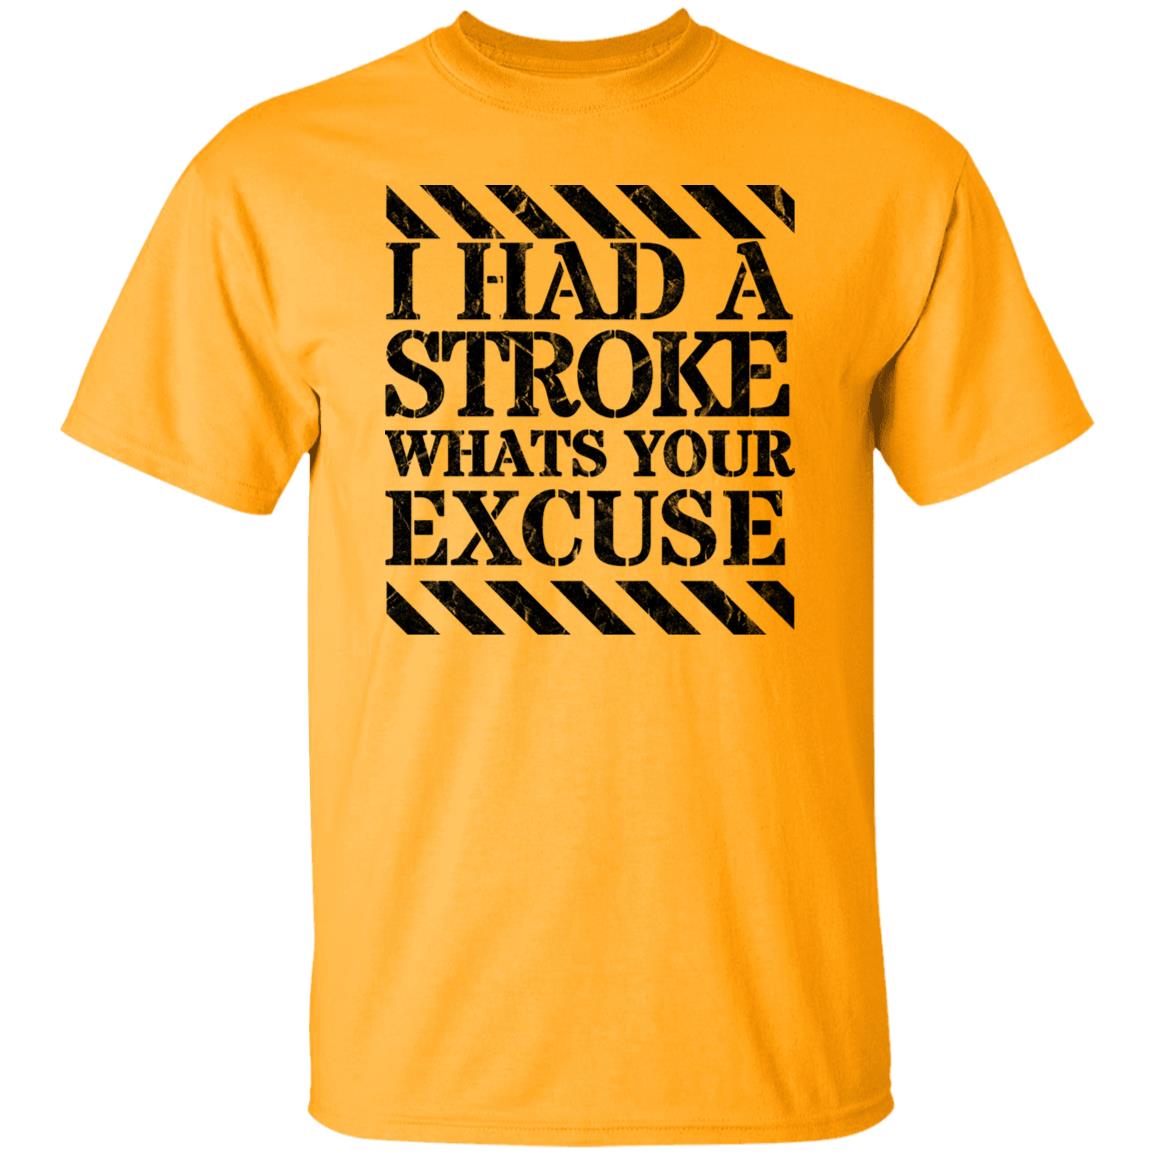 I had a stroke what's your excuse T-Shirt Black - Expressive DeZien 